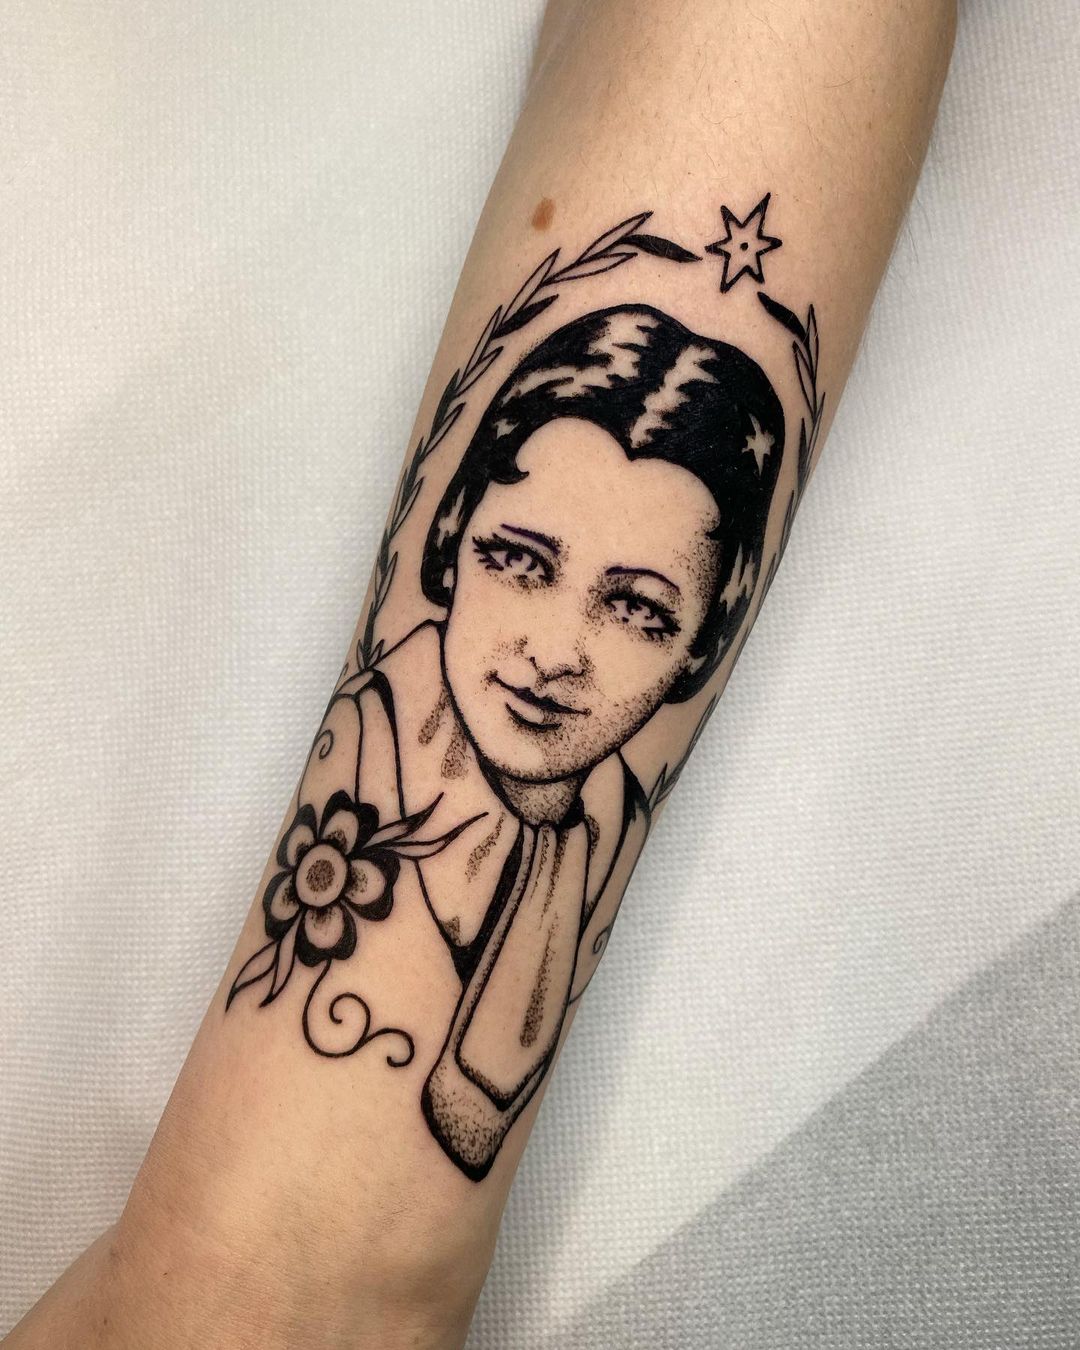 Grandmother's Portrait With Floral Accents Tattoo